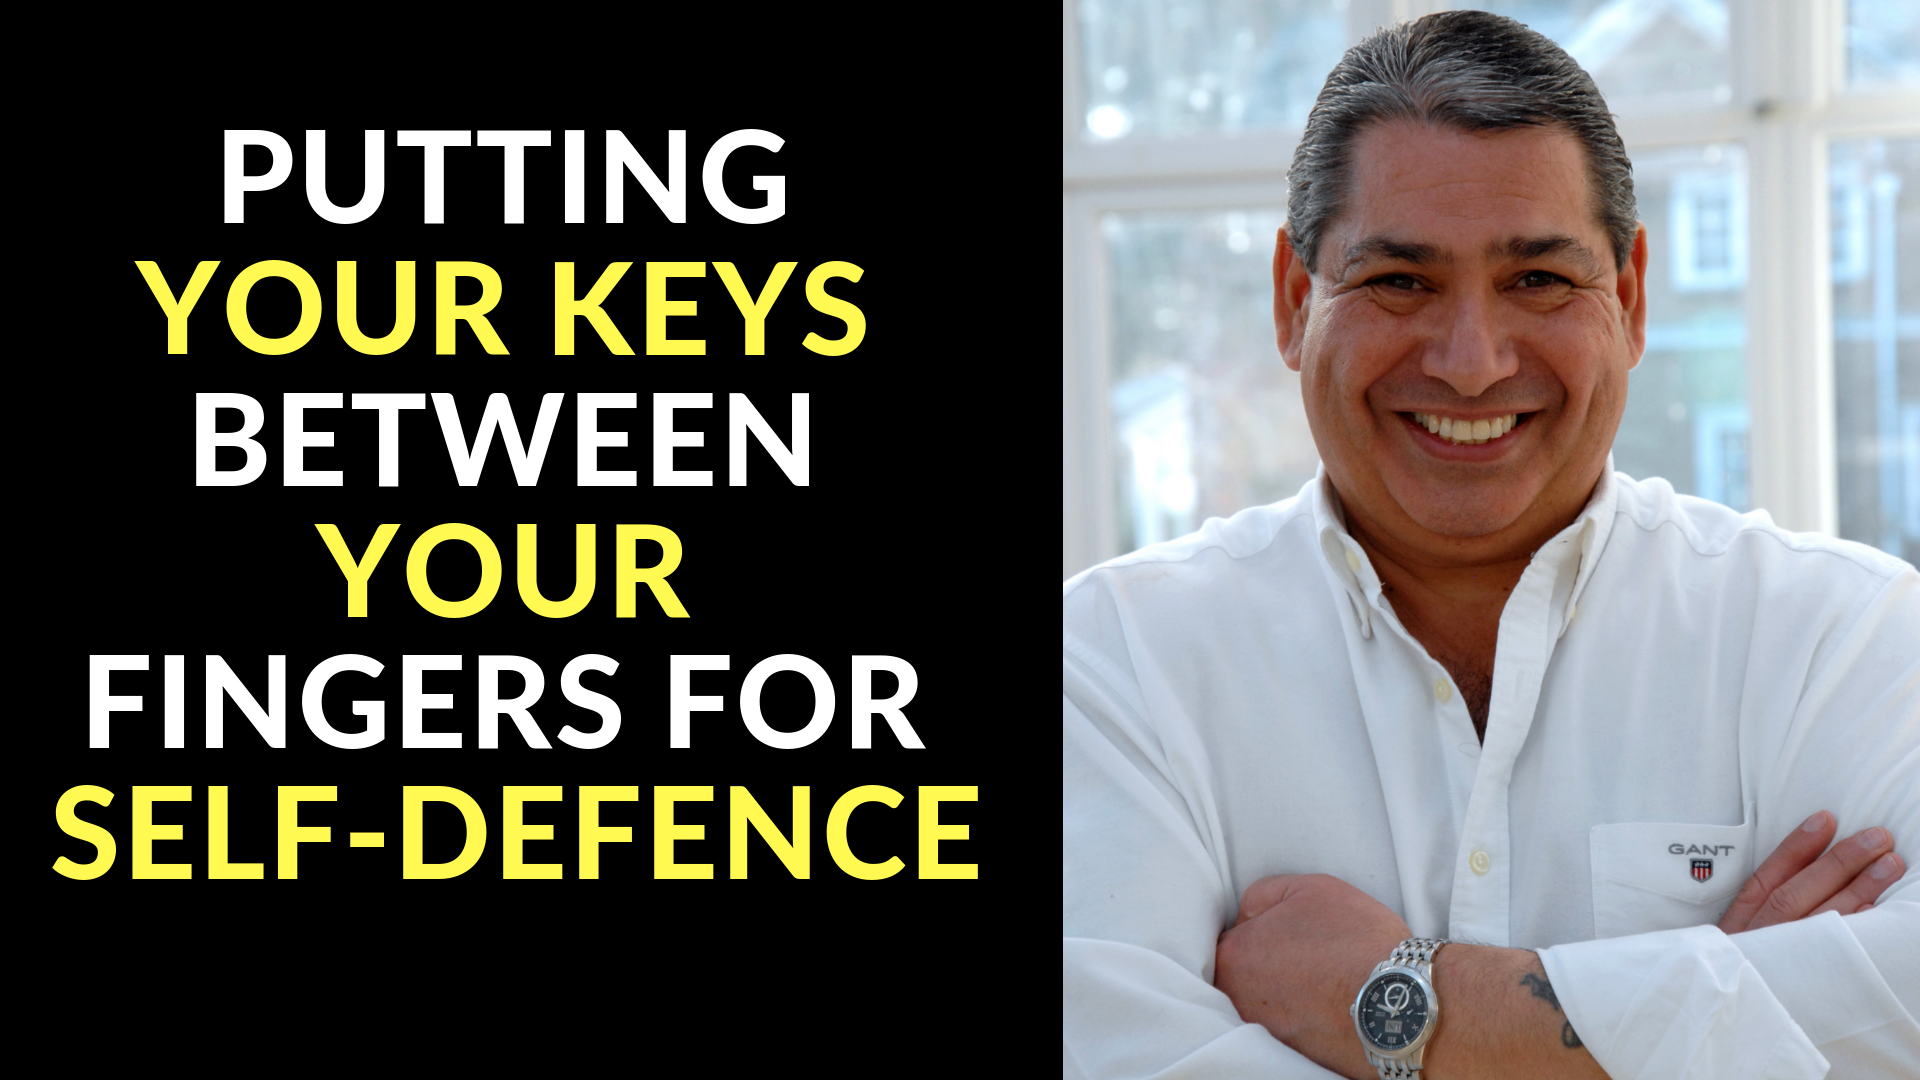 Putting Your Keys Between Your Fingers for Self-Defence